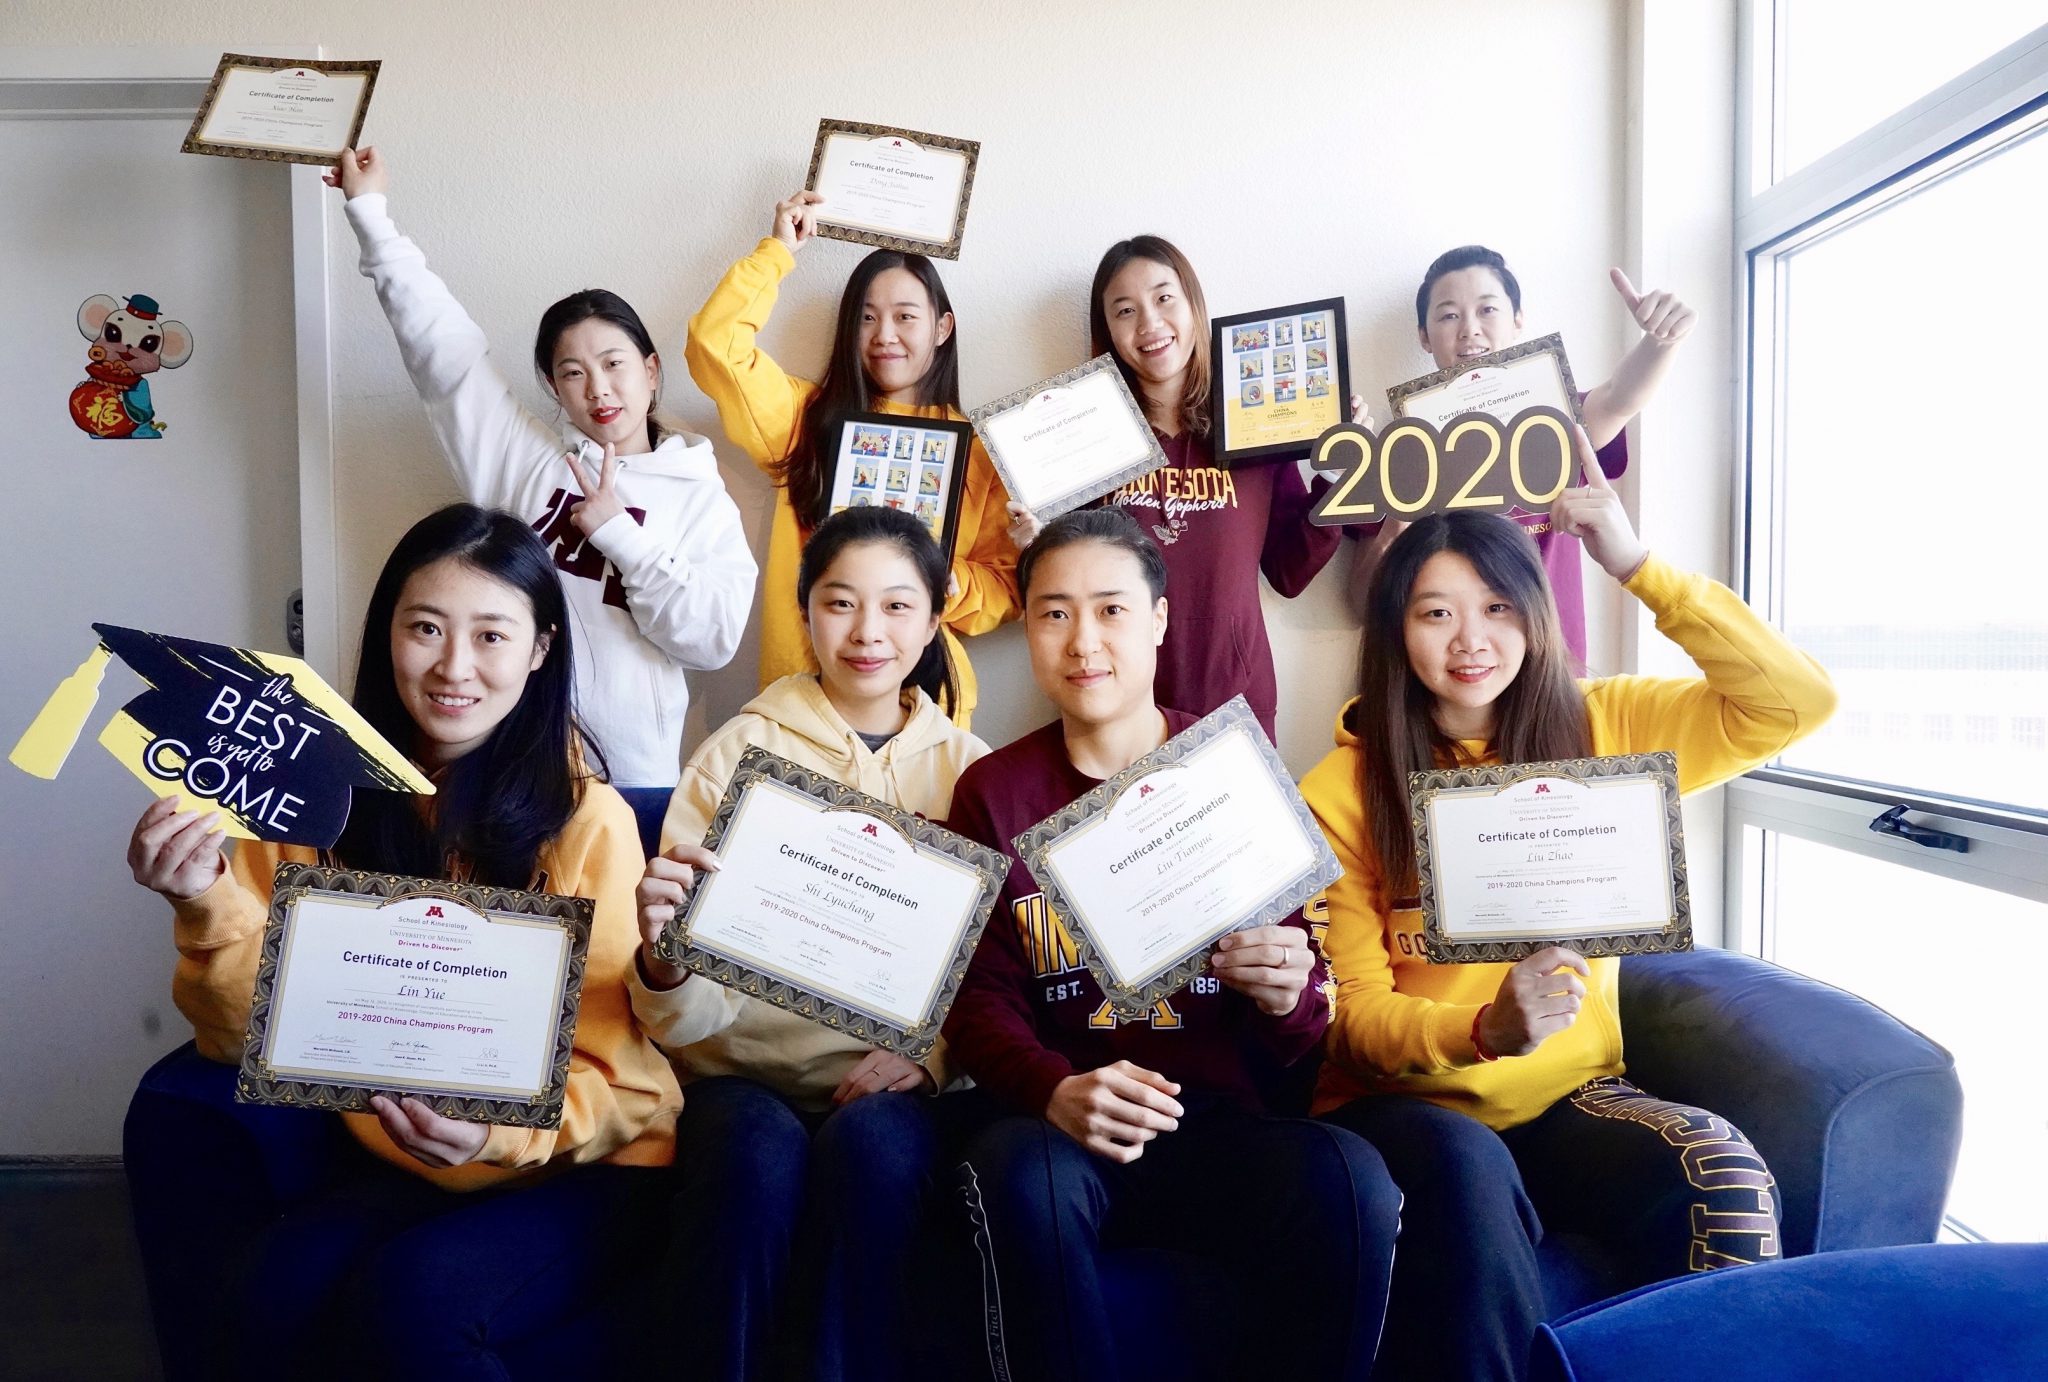 China Champions with their certificates of completion